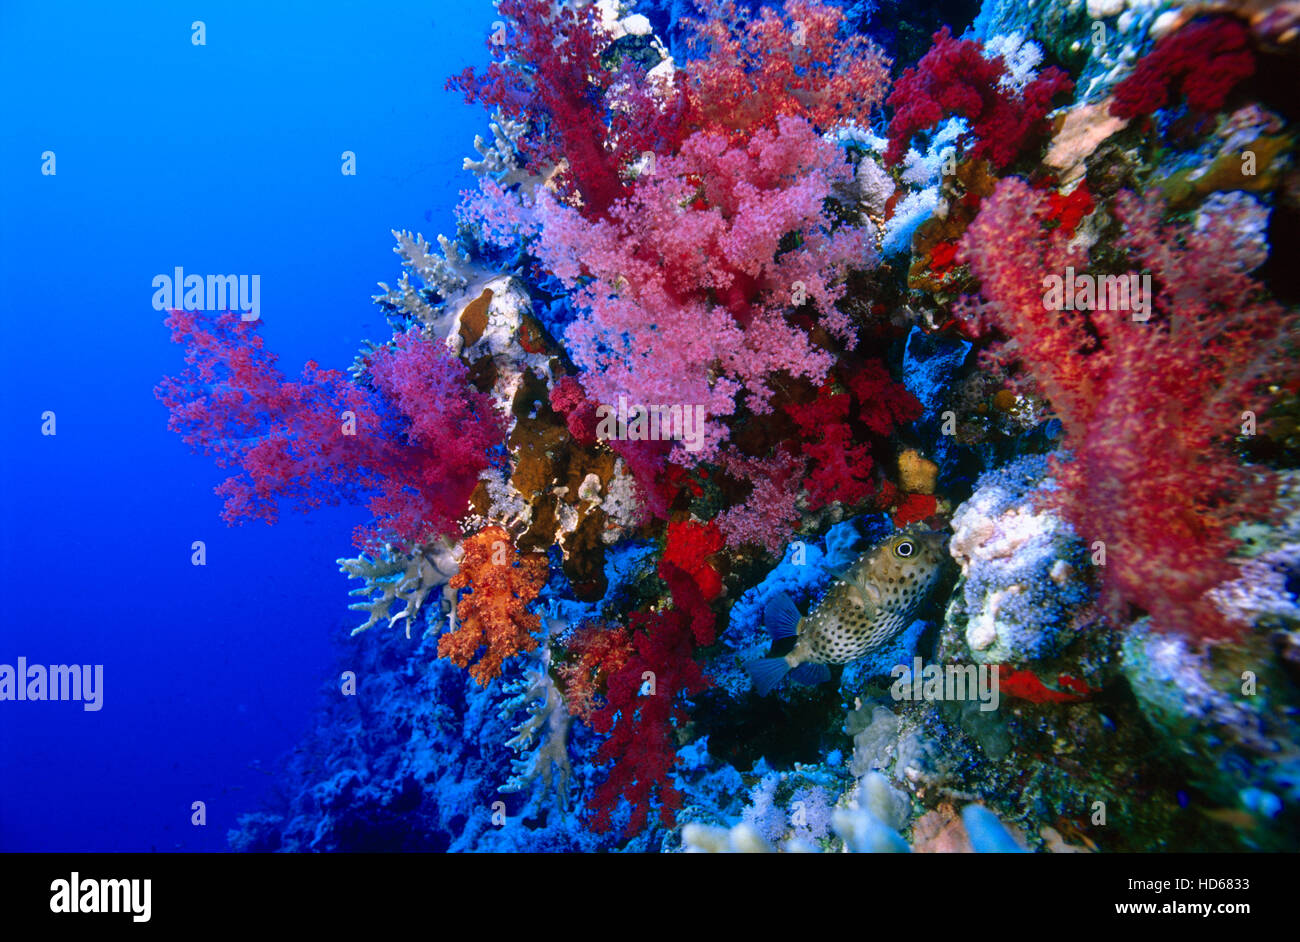 Red Soft Tree Coral (Dendronephthya hemprichi), Red Sea, Egypt, Africa Stock Photo